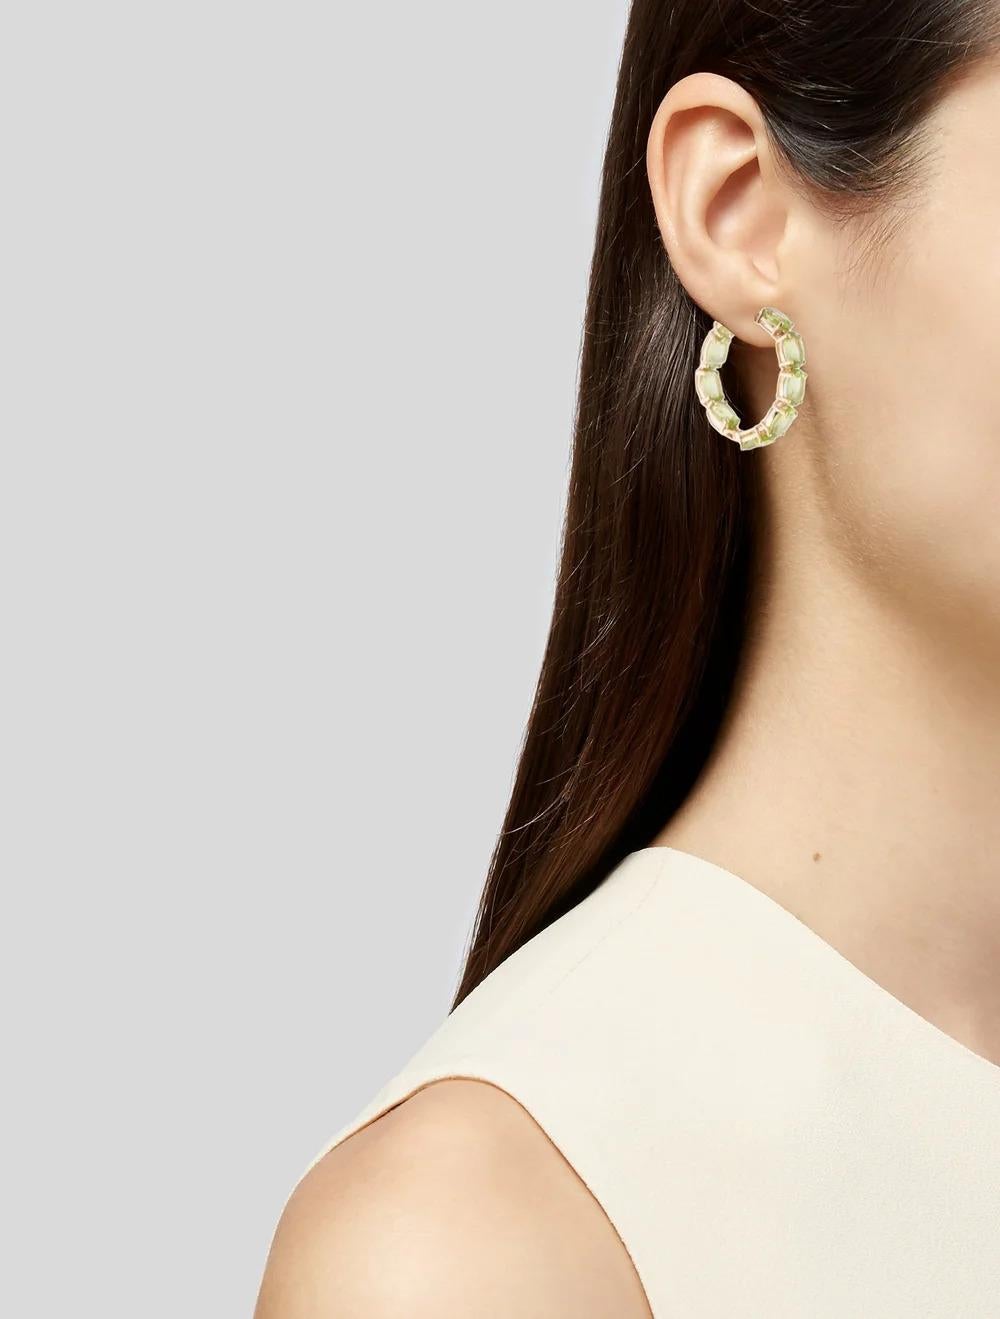 Introducing our stunning 14K Yellow Gold Inside-Out Hoop Earrings, adorned with 9.03 Carat Oval Modified Brilliant Peridot gemstones, radiating elegance and sophistication. Crafted to perfection, these exquisite earrings are a timeless addition to